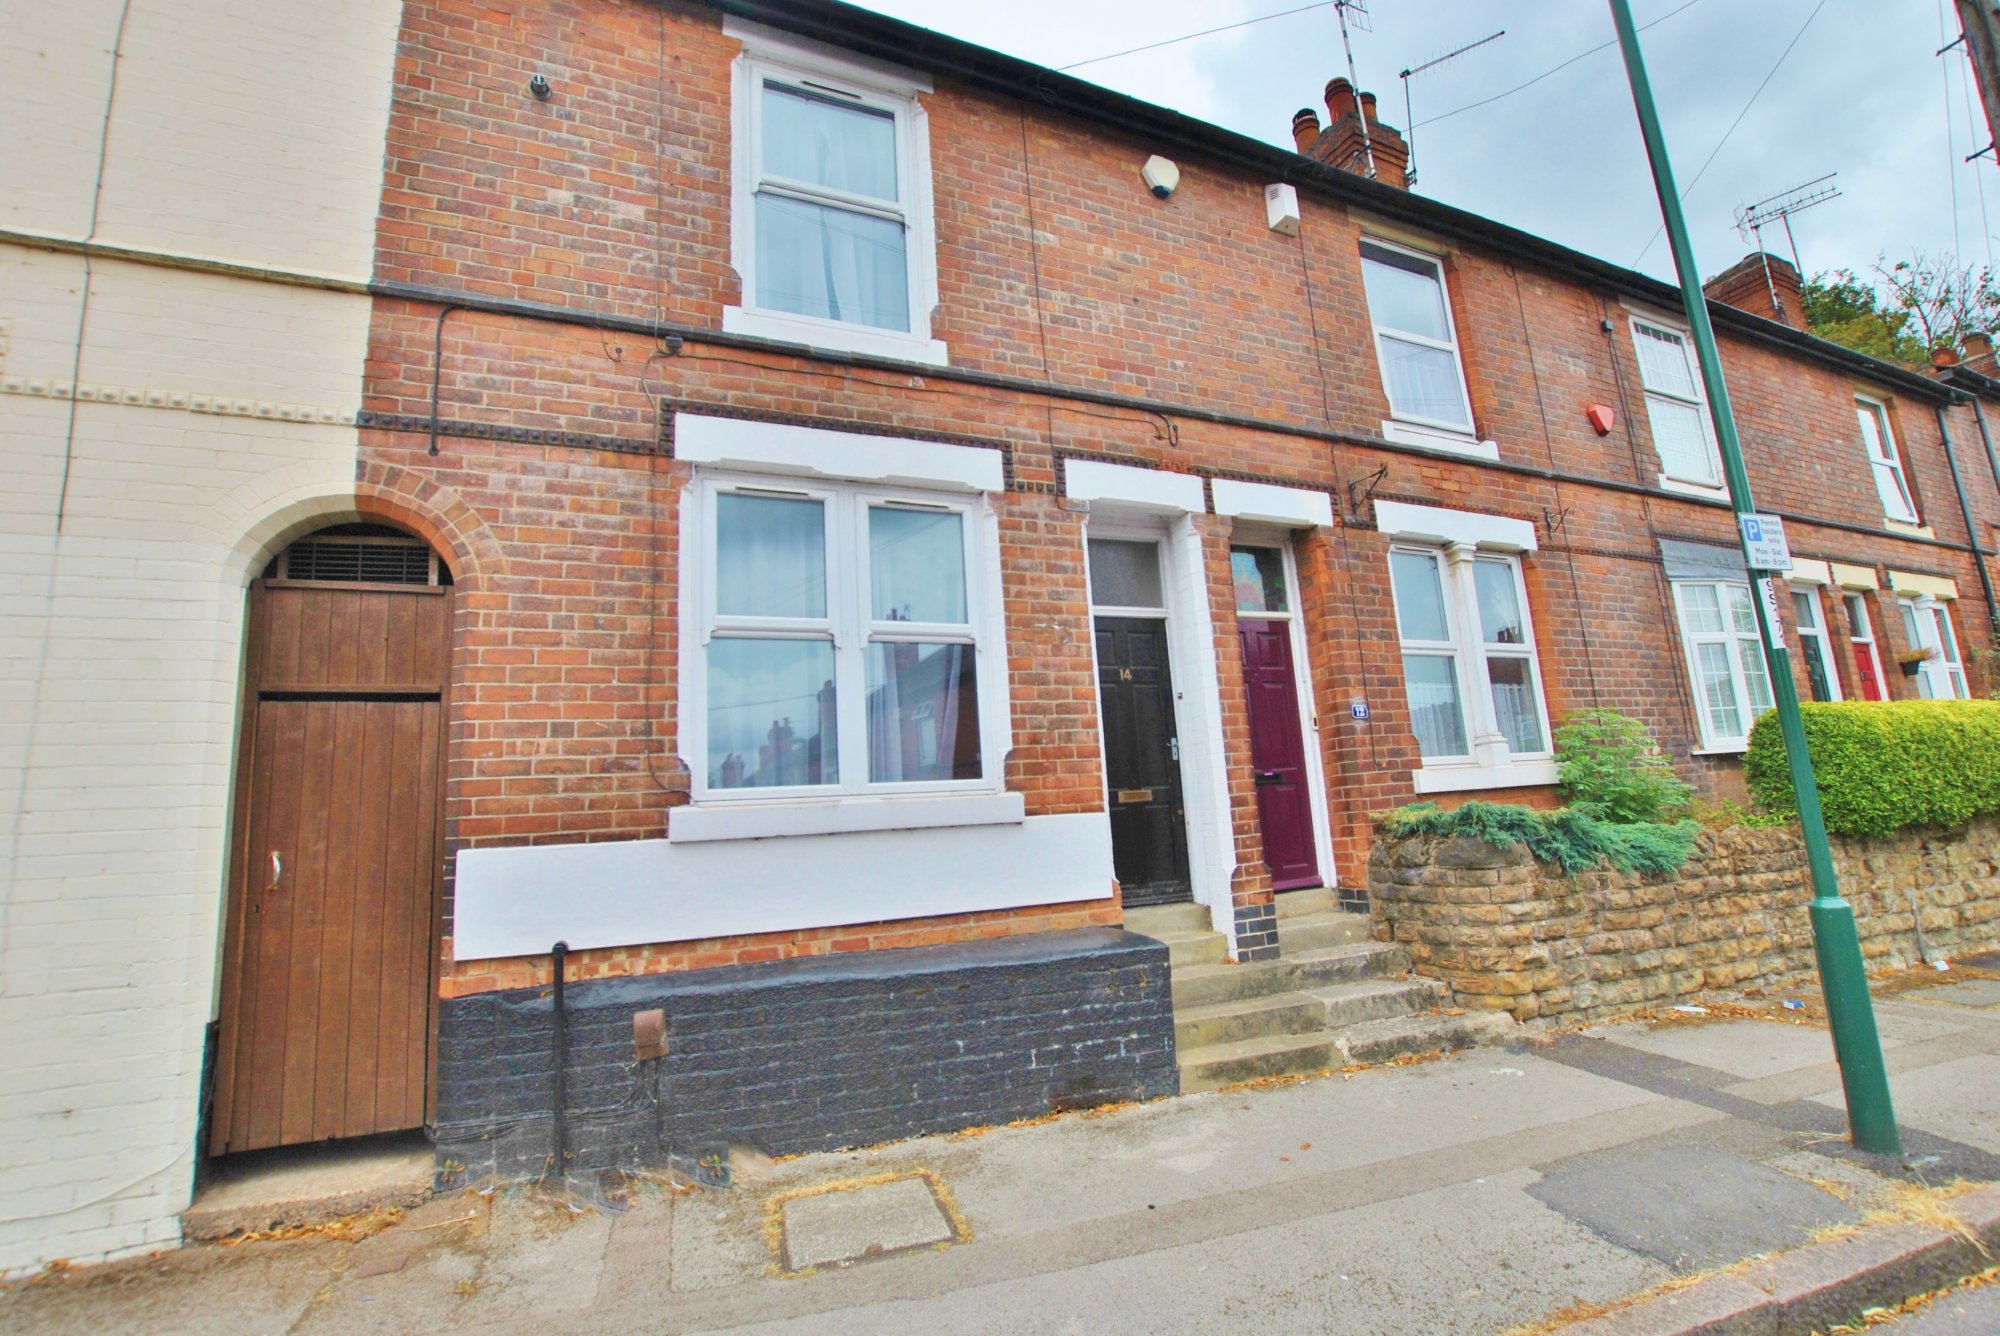 2 bed house to rent in Spalding Road - Property Image 1